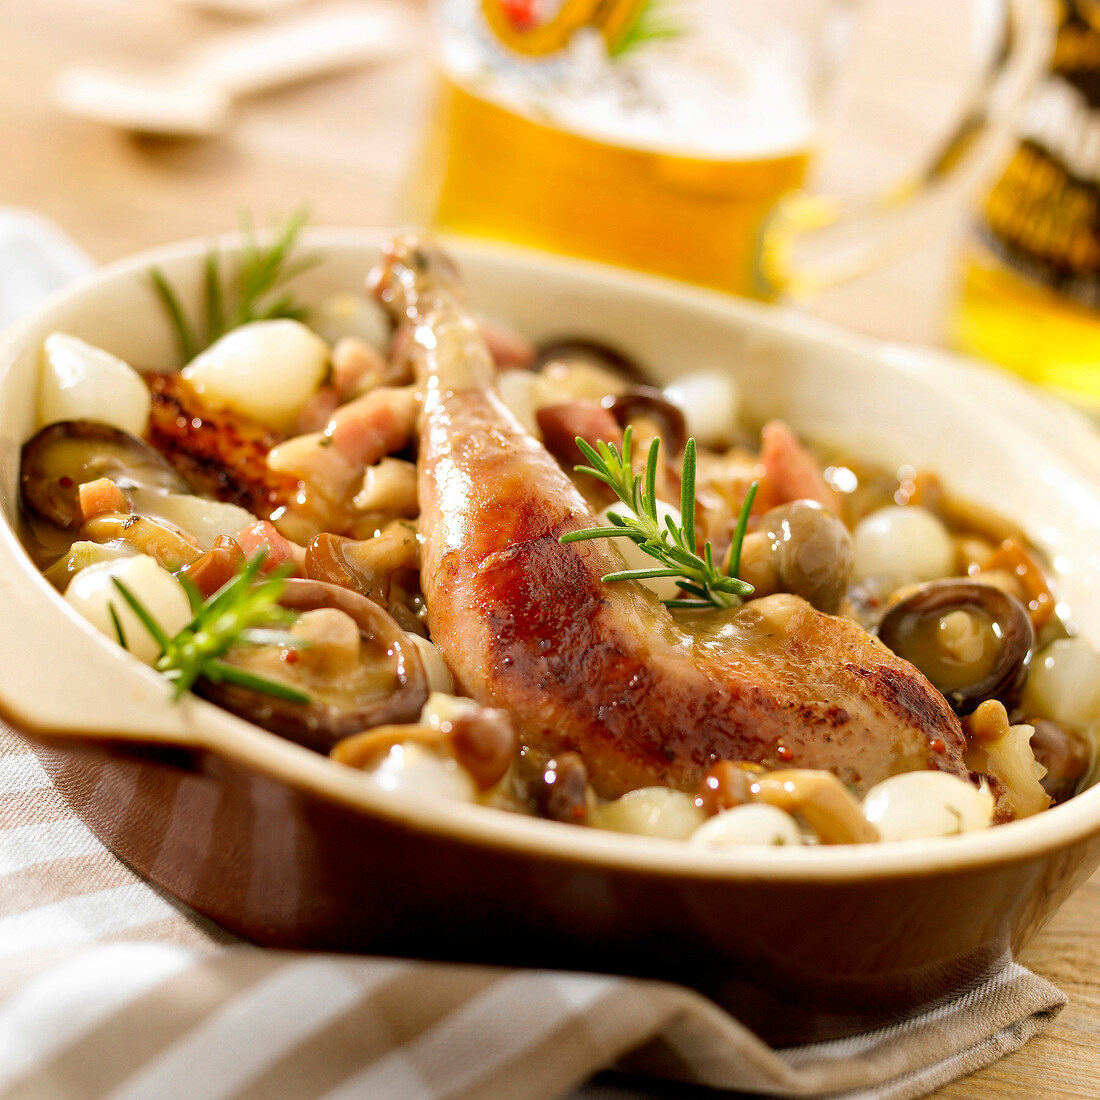 Pheasant with beer and mushrooms